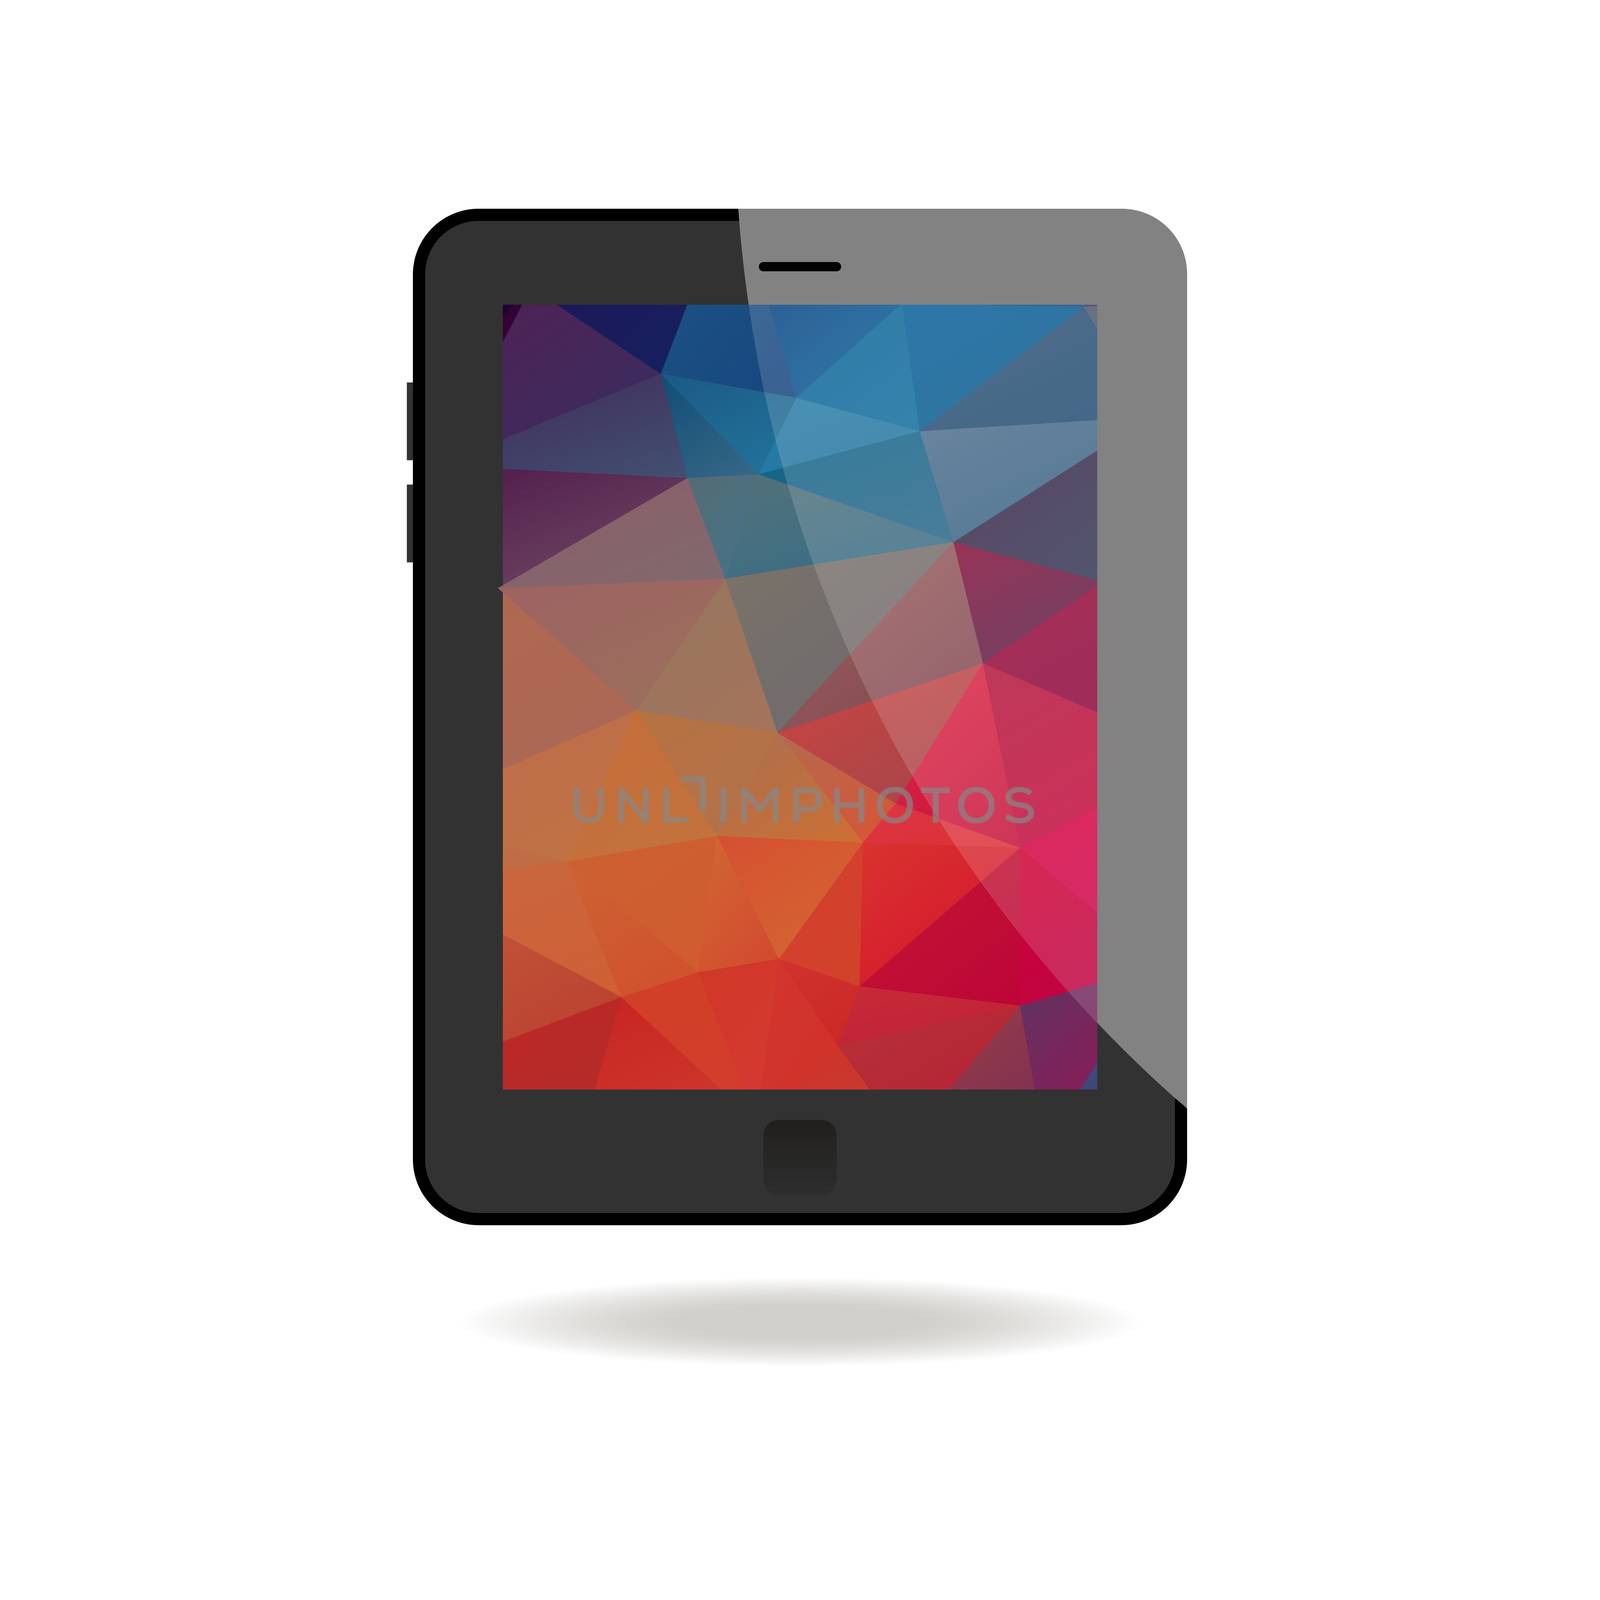 Illustration Of Tablet With Abstract Background by Elena_Garder